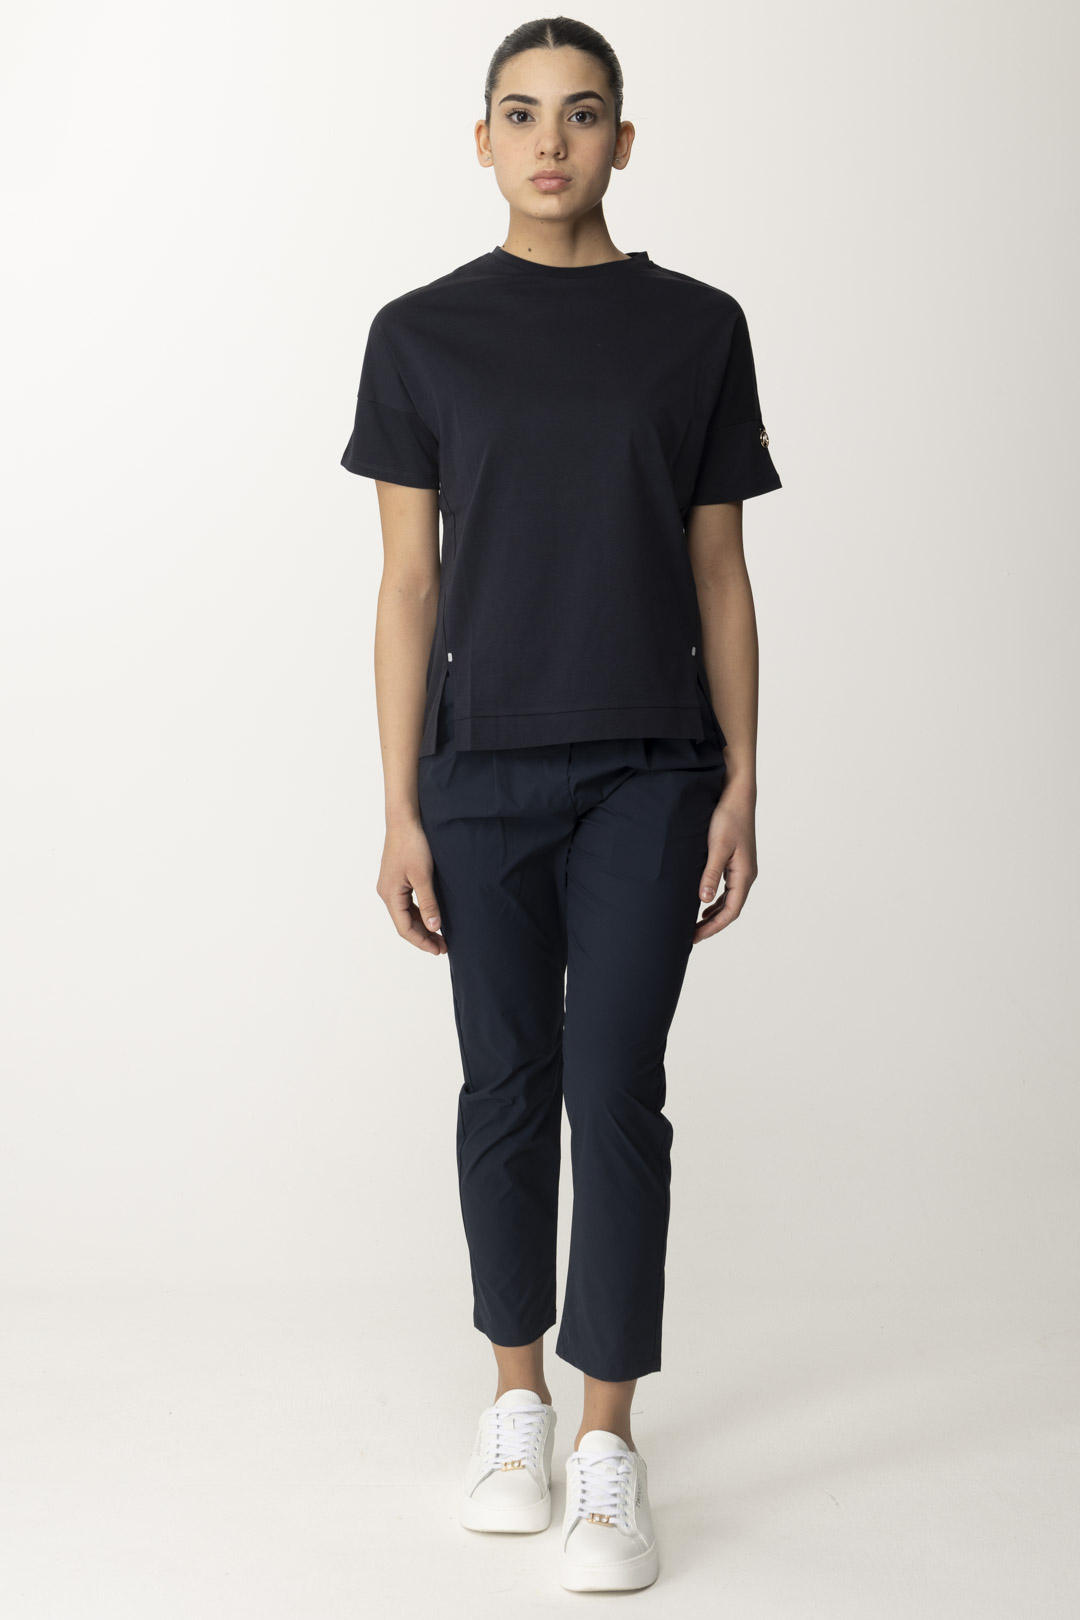 Preview: People Of Shibuya T-shirt with Back Zip Detail Nero